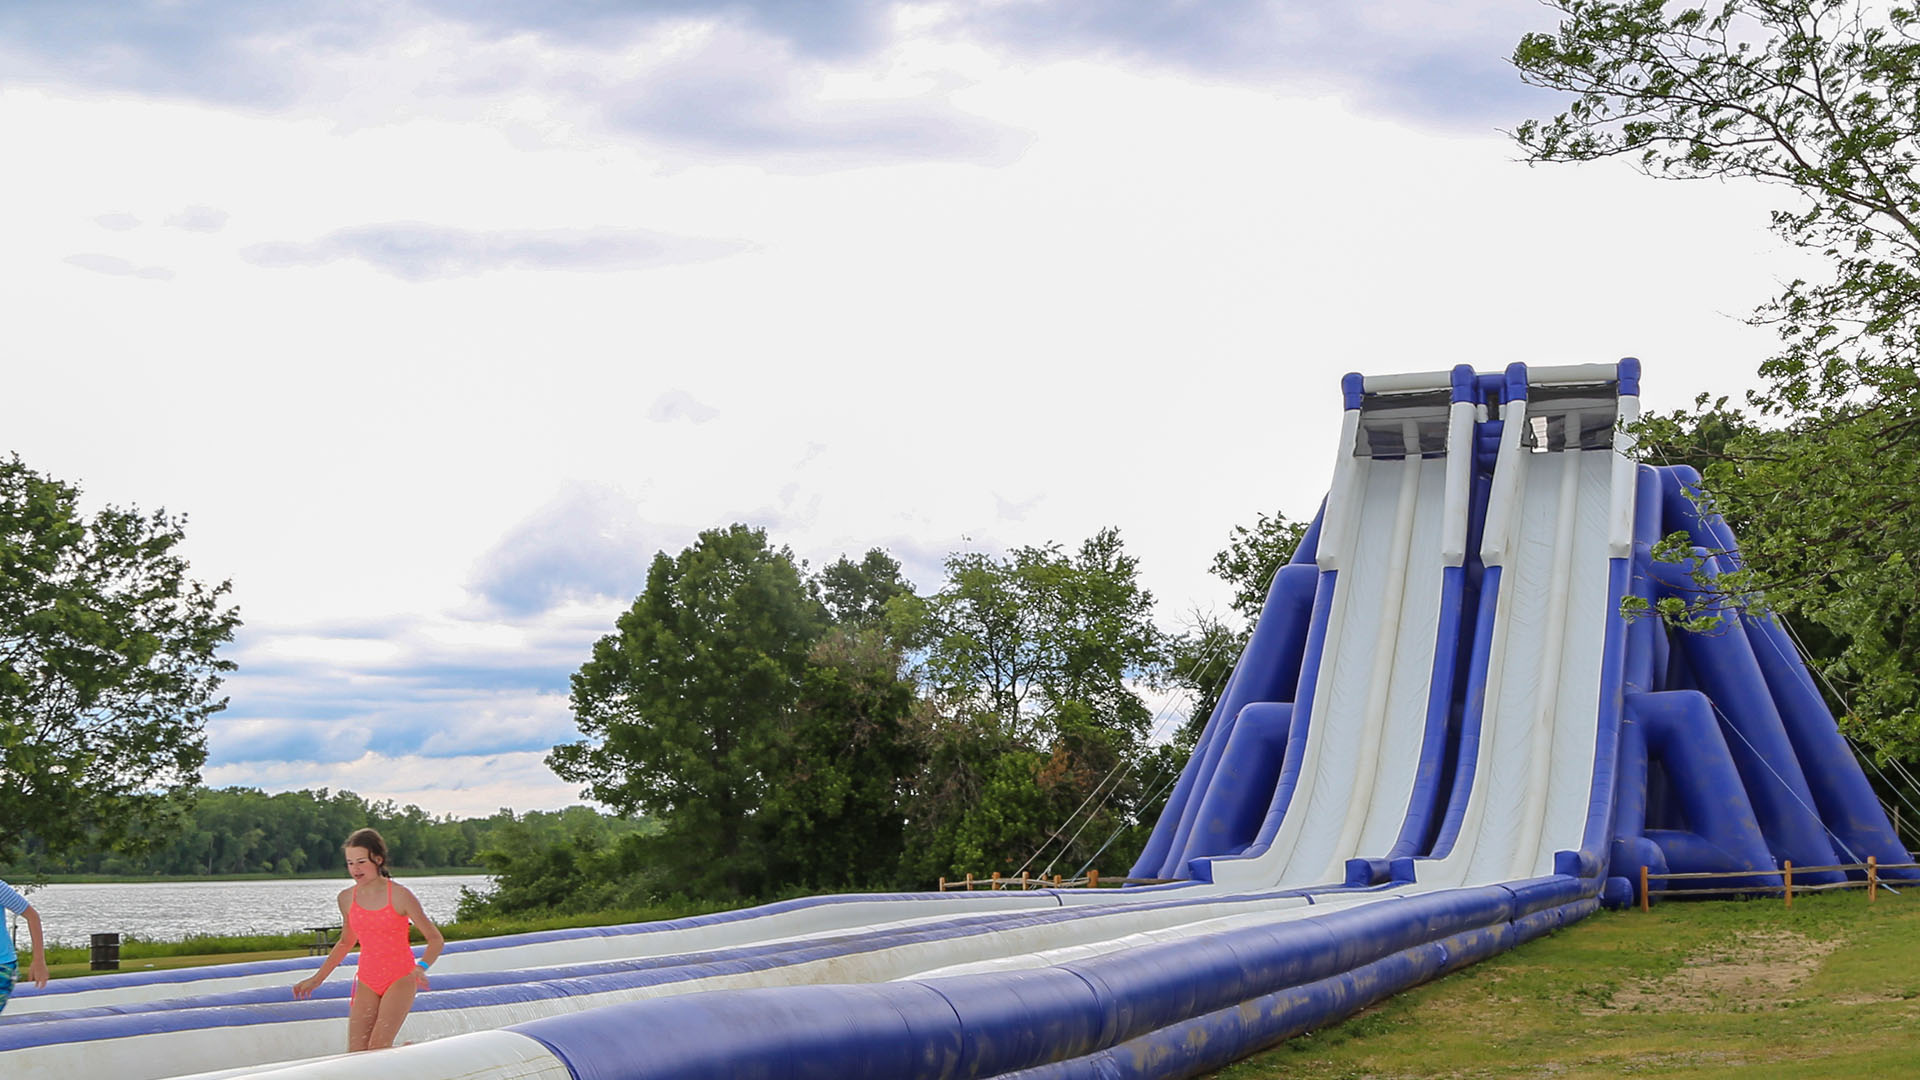 Stoney Creek Metro Park - Best Outdoor Things To Do in Shelby Township -  Acadia Homes